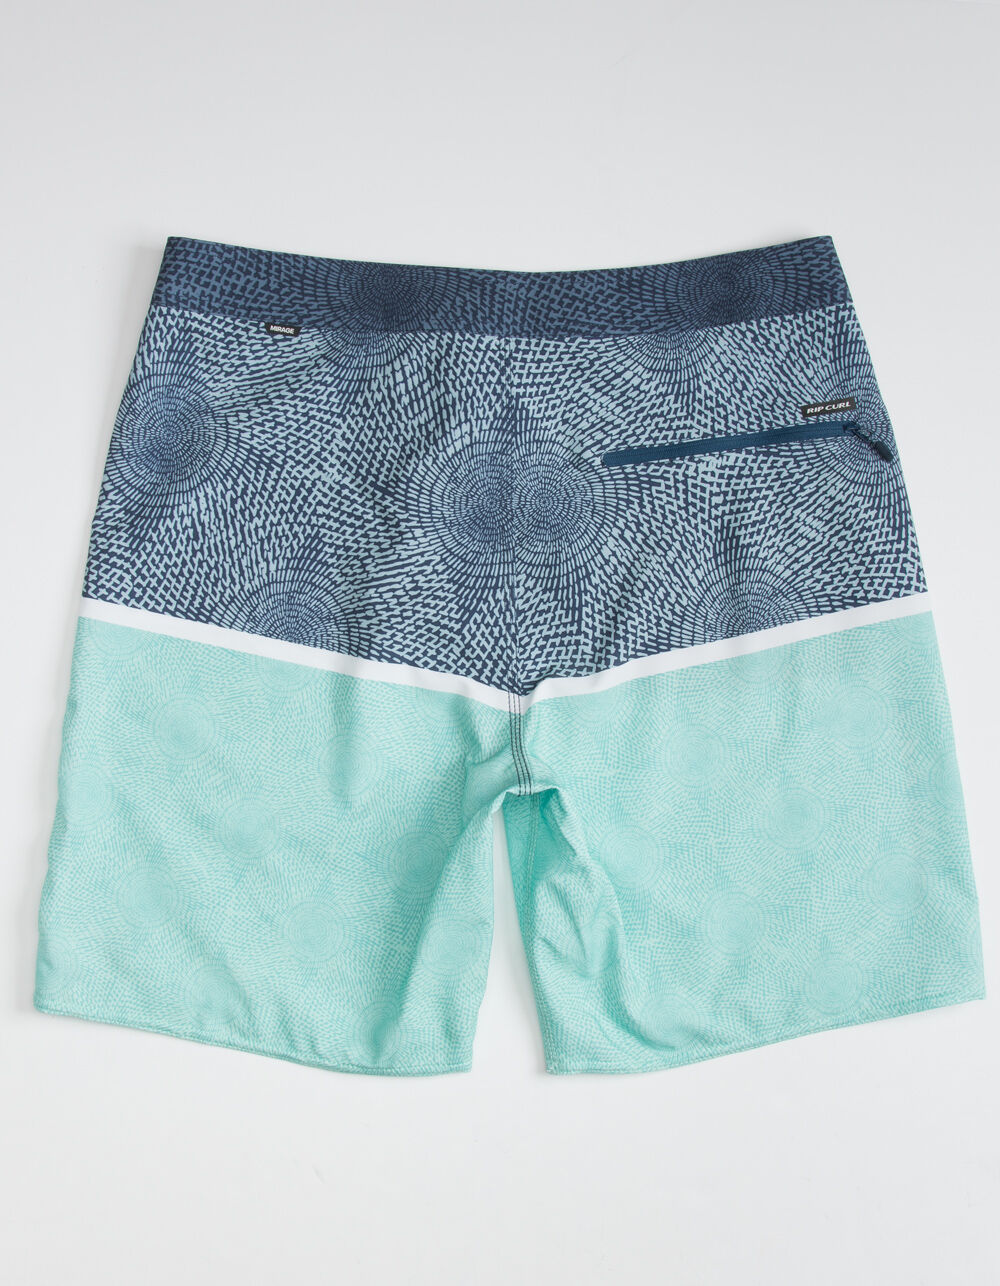 RIP CURL Mirage Combined 2.0 Mens Boardshorts image number 1